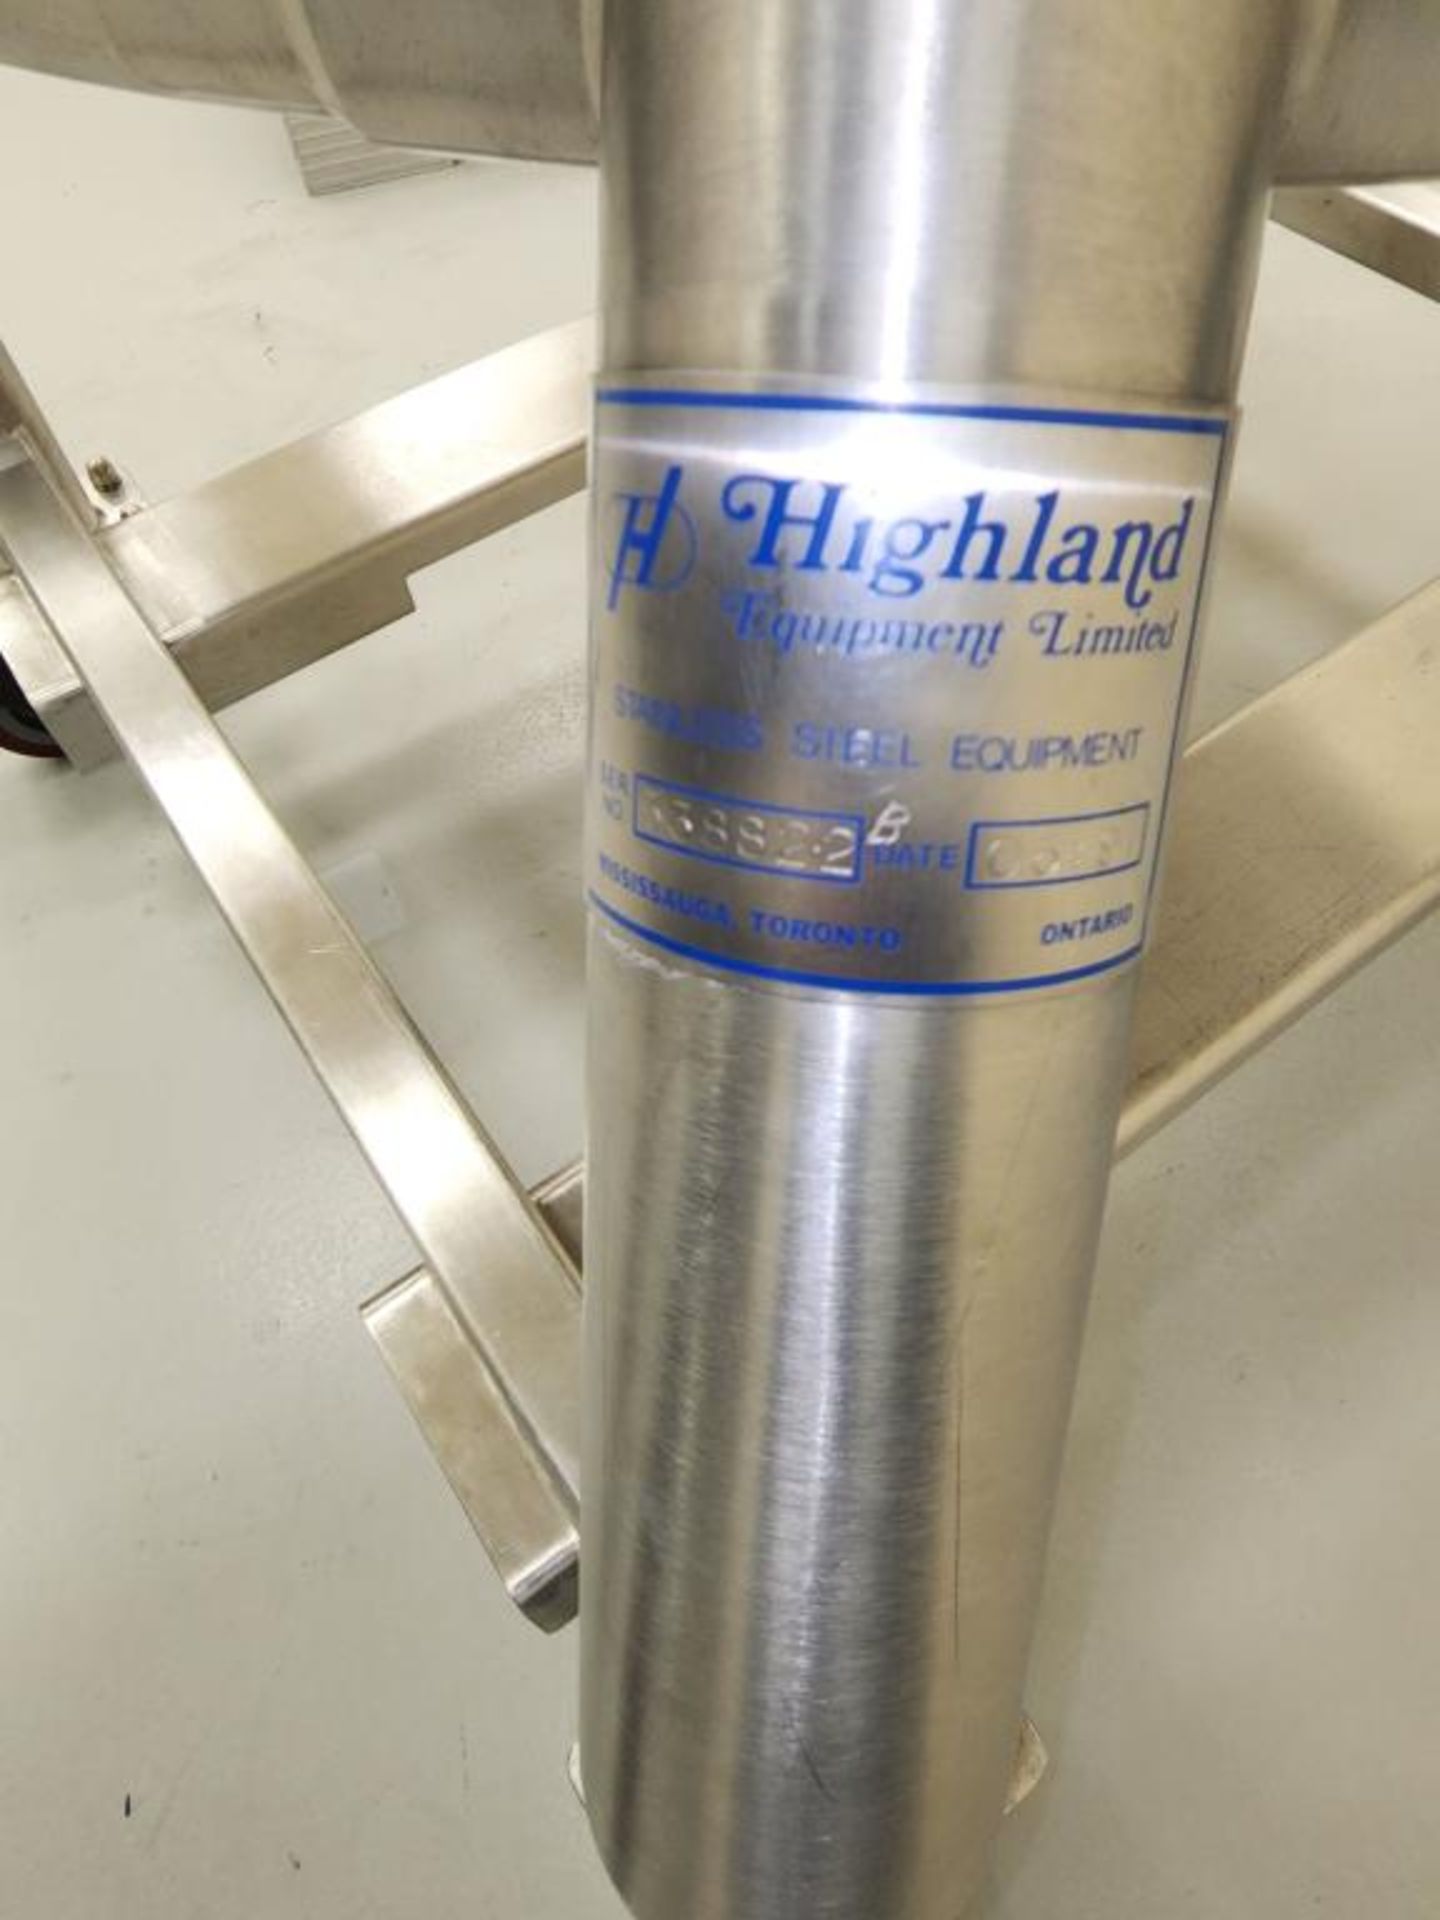 Highland 900L Stainless Steel Tank - Image 4 of 6